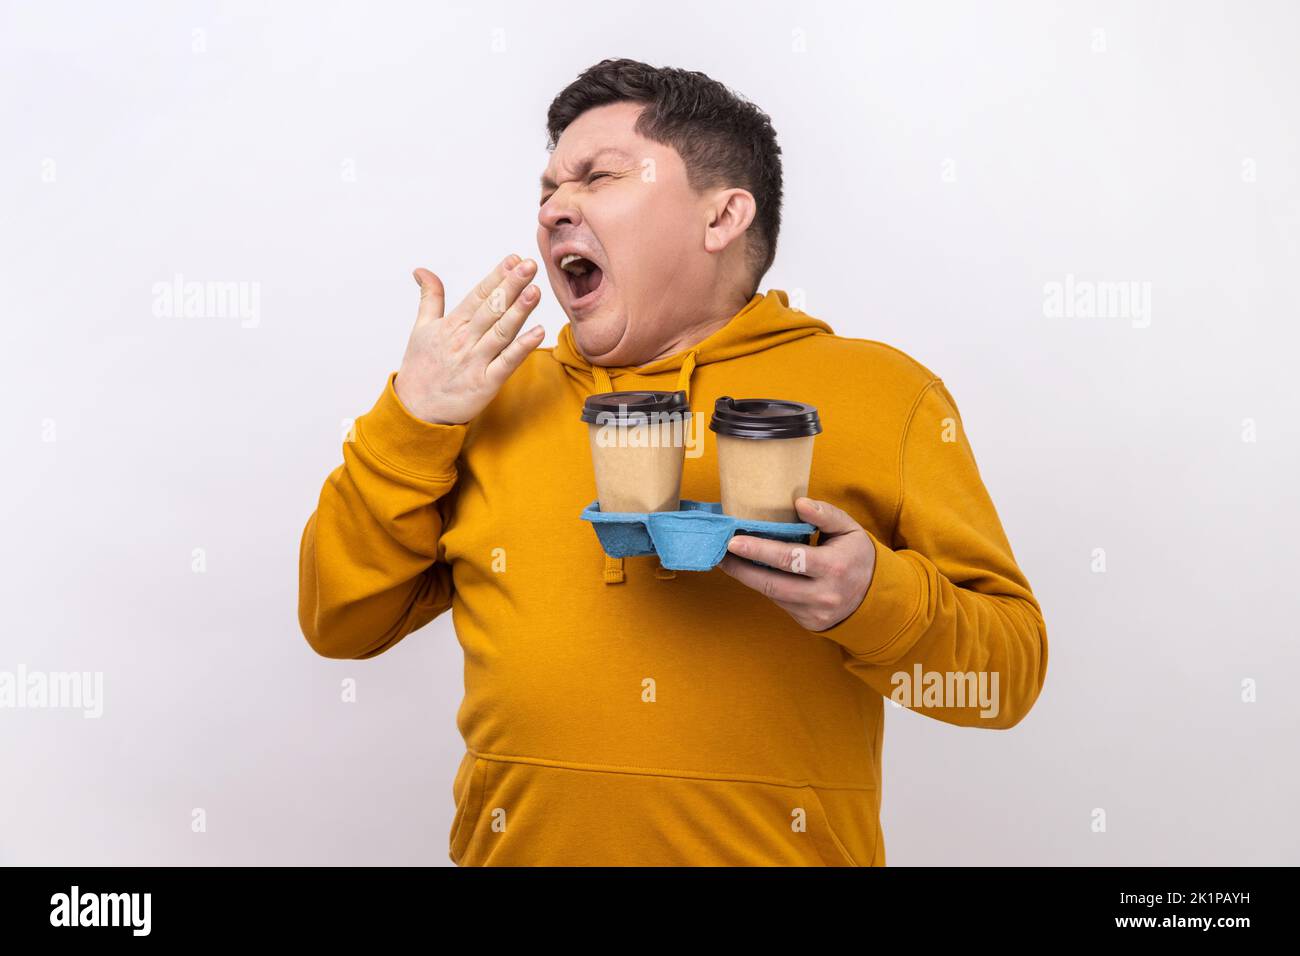 Portrait of tired exhausted man holding coffee cups and yawning, feeling bored after stressful working day, wearing urban style hoodie. Indoor studio shot isolated on white background. Stock Photo